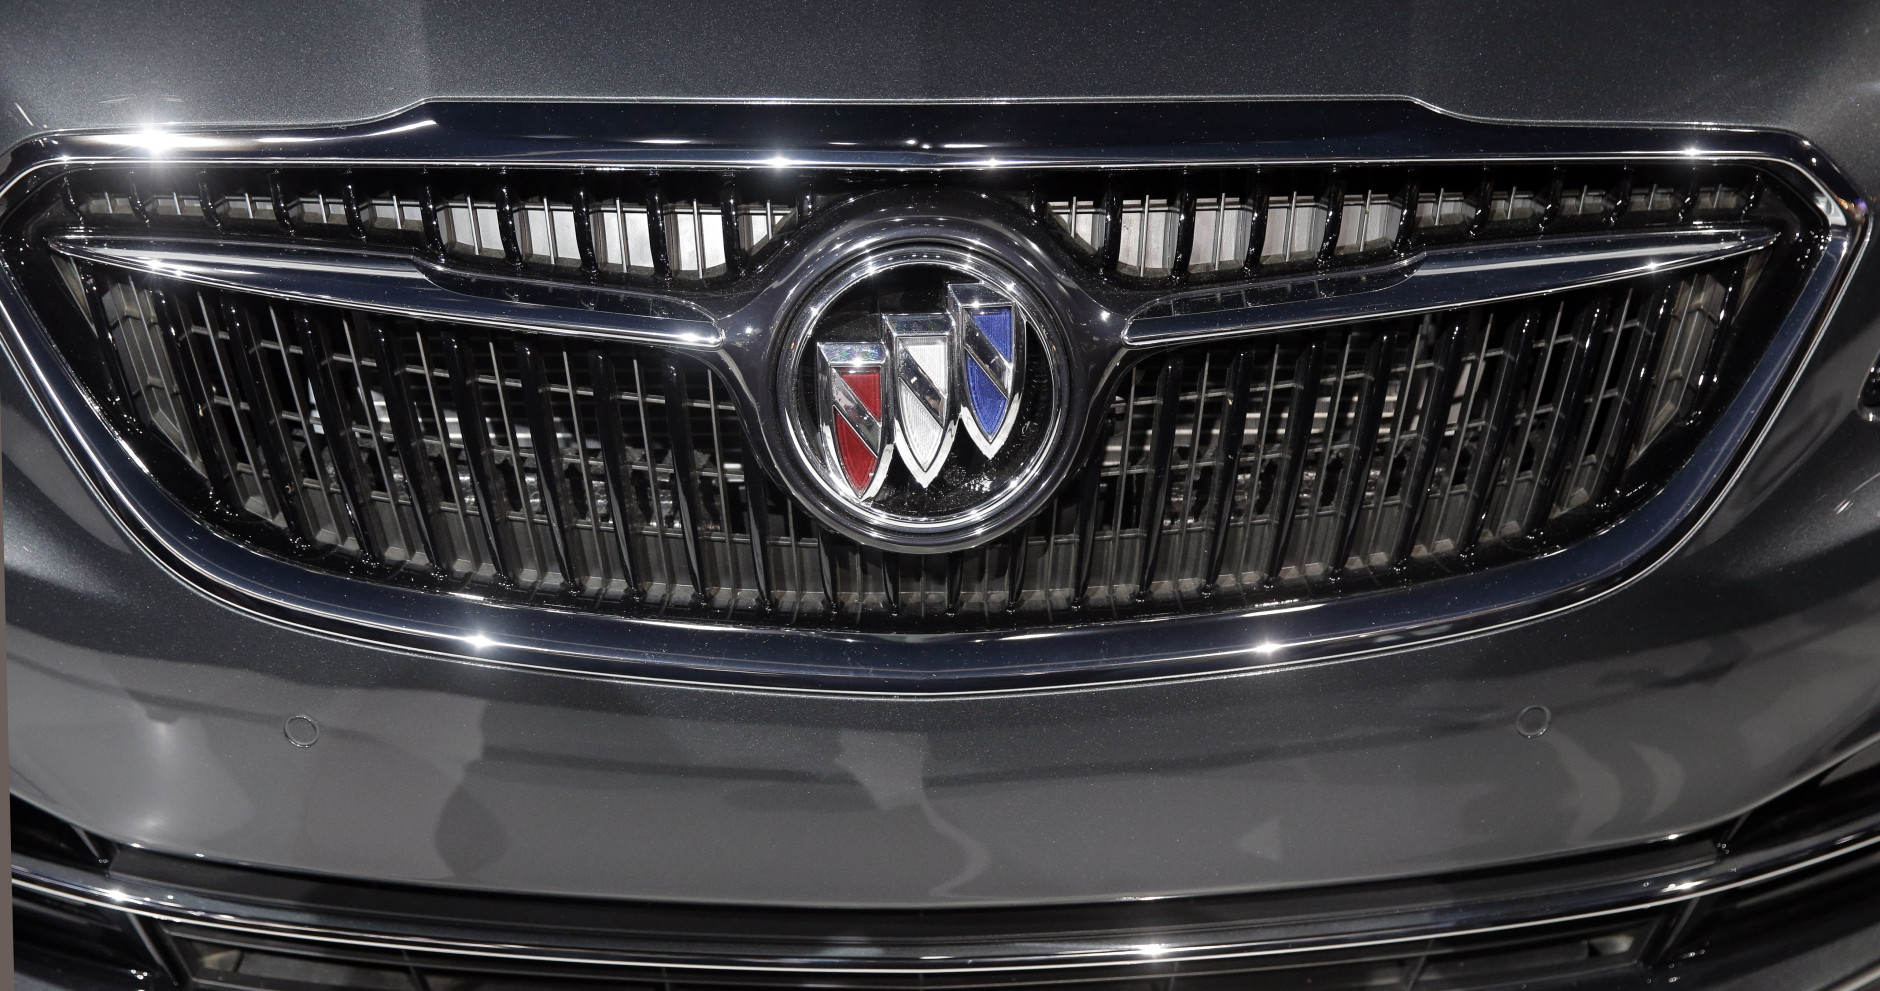 The grill of a 2017 Buick LaCrosse is shown at the Los Angeles Auto Show on Wednesday, Nov. 18, 2015, in Los Angeles. (AP Photo/Chris Carlson)